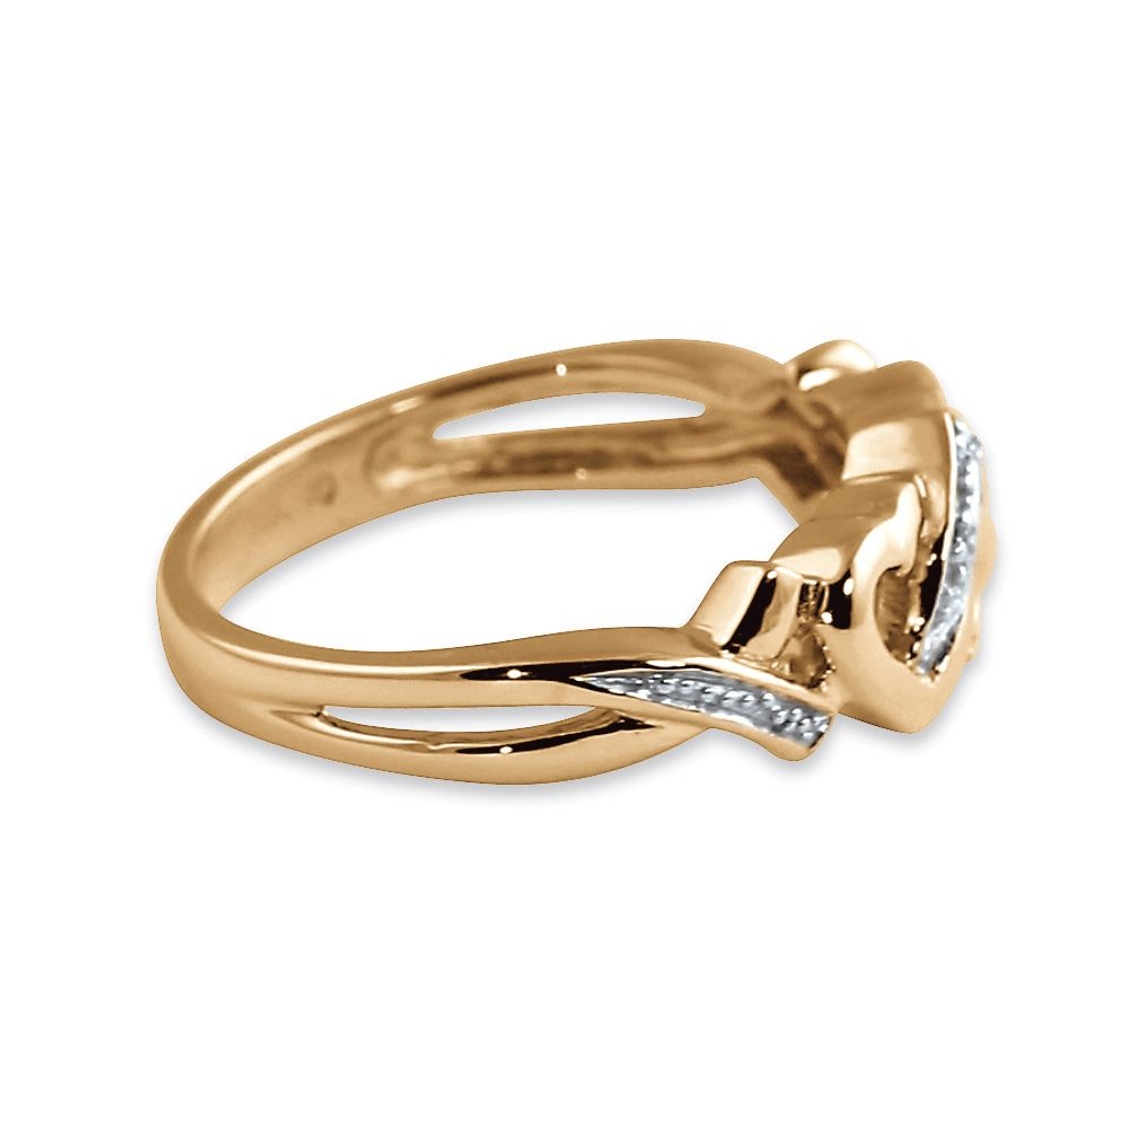 Diamond Accent Two-Tone Interlocking Hearts Ring in 18k Gold-plated Sterling Silver - Image 2 of 5